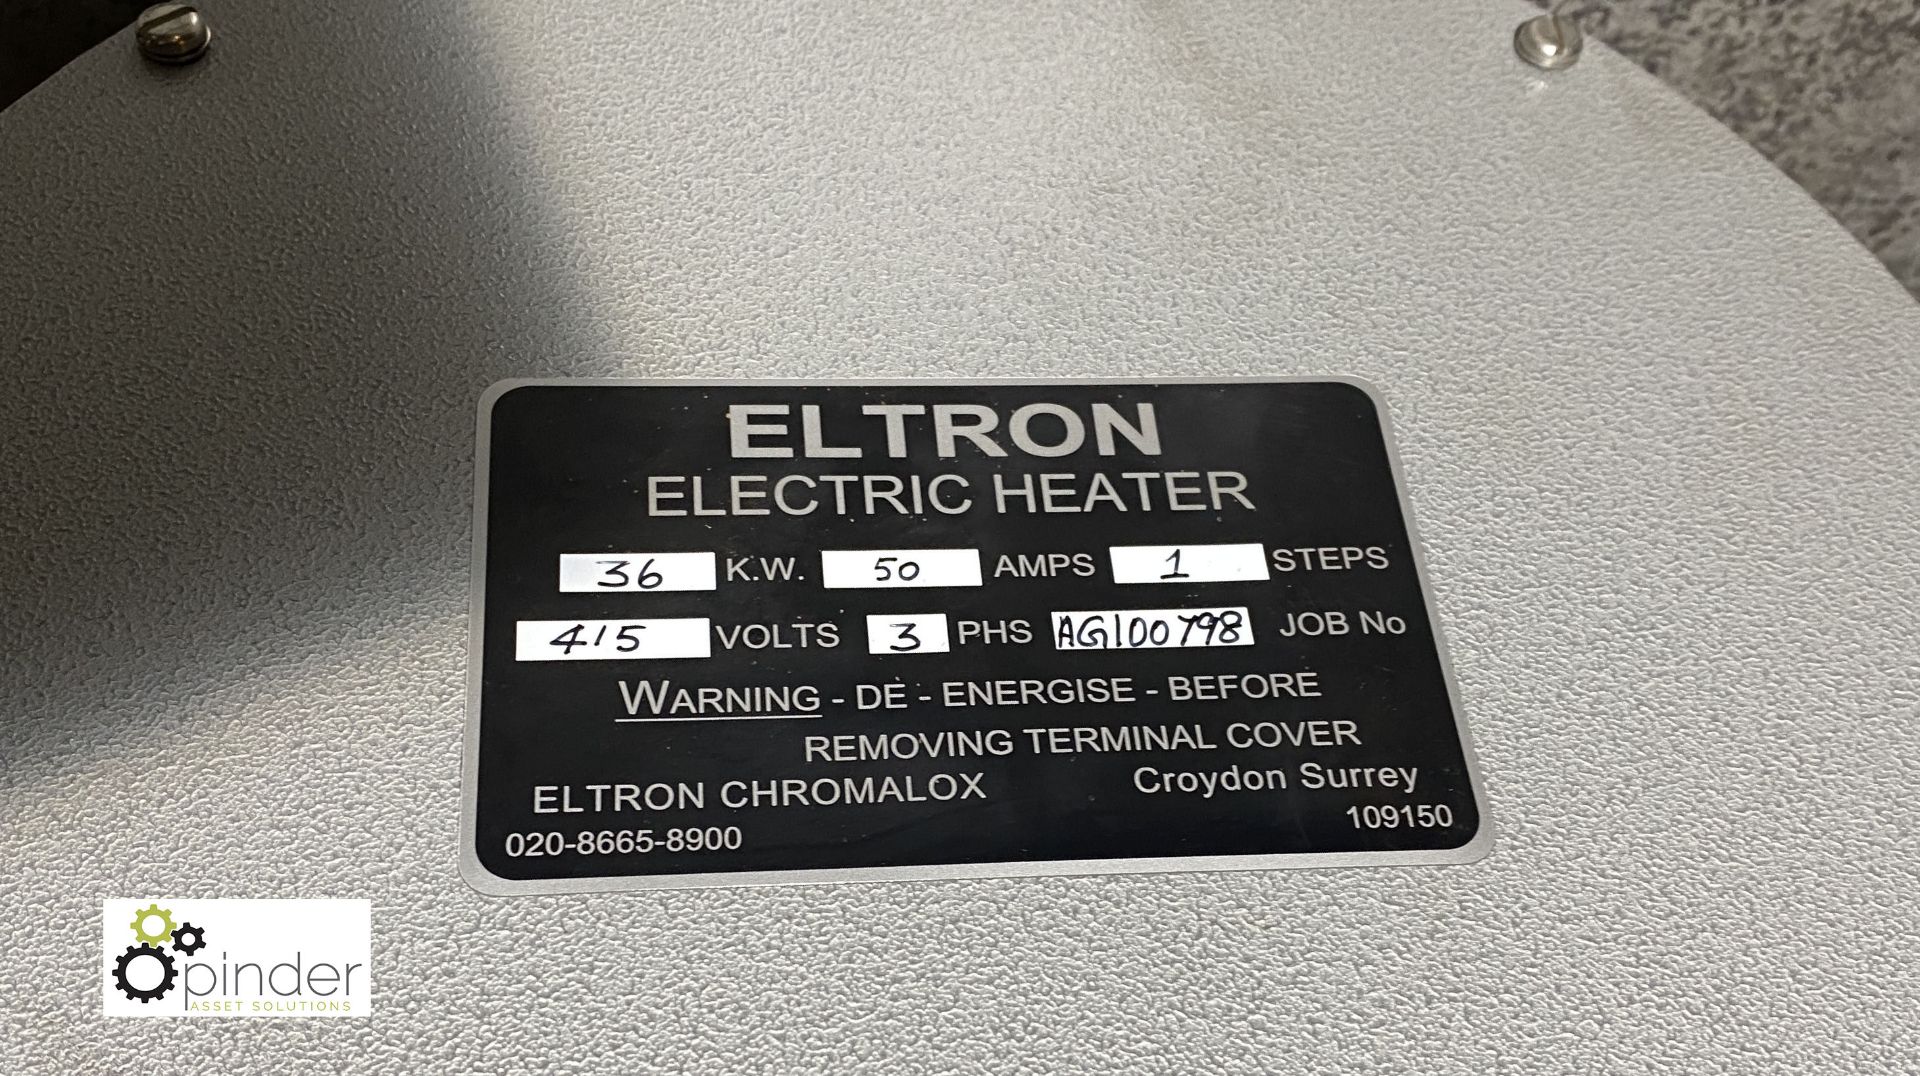 Eltron Electric Heater, 36kw, serial number AG100798 (please note there is a lift out fee of £5 plus - Image 2 of 2